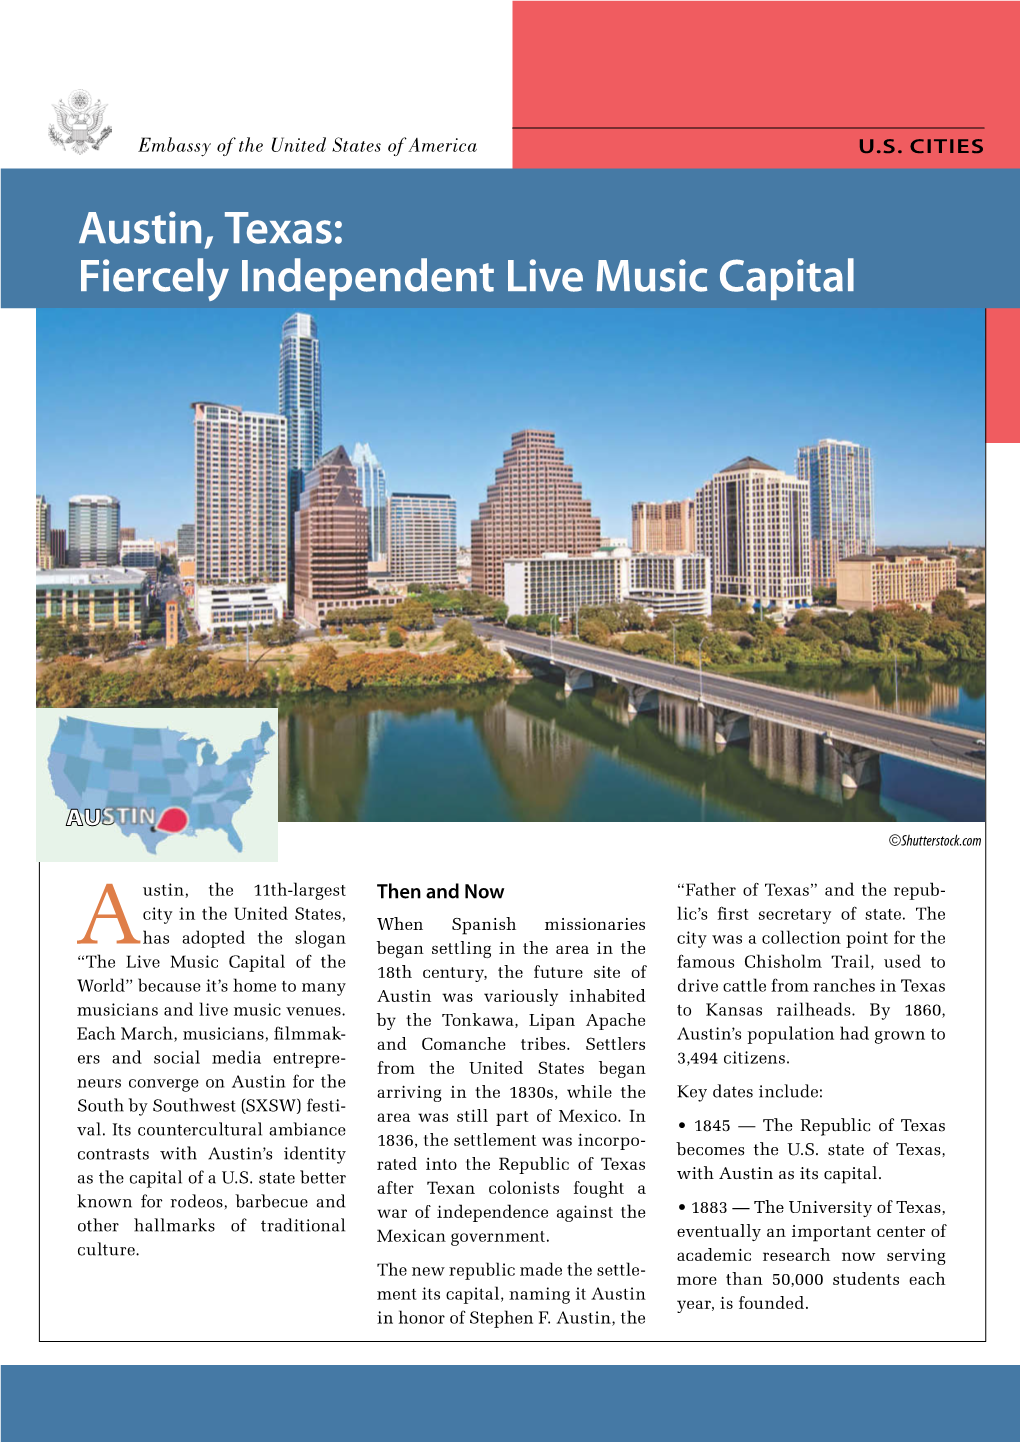 U.S. CITIES: Austin, Texas: Fiercely Independent Live Music Capital